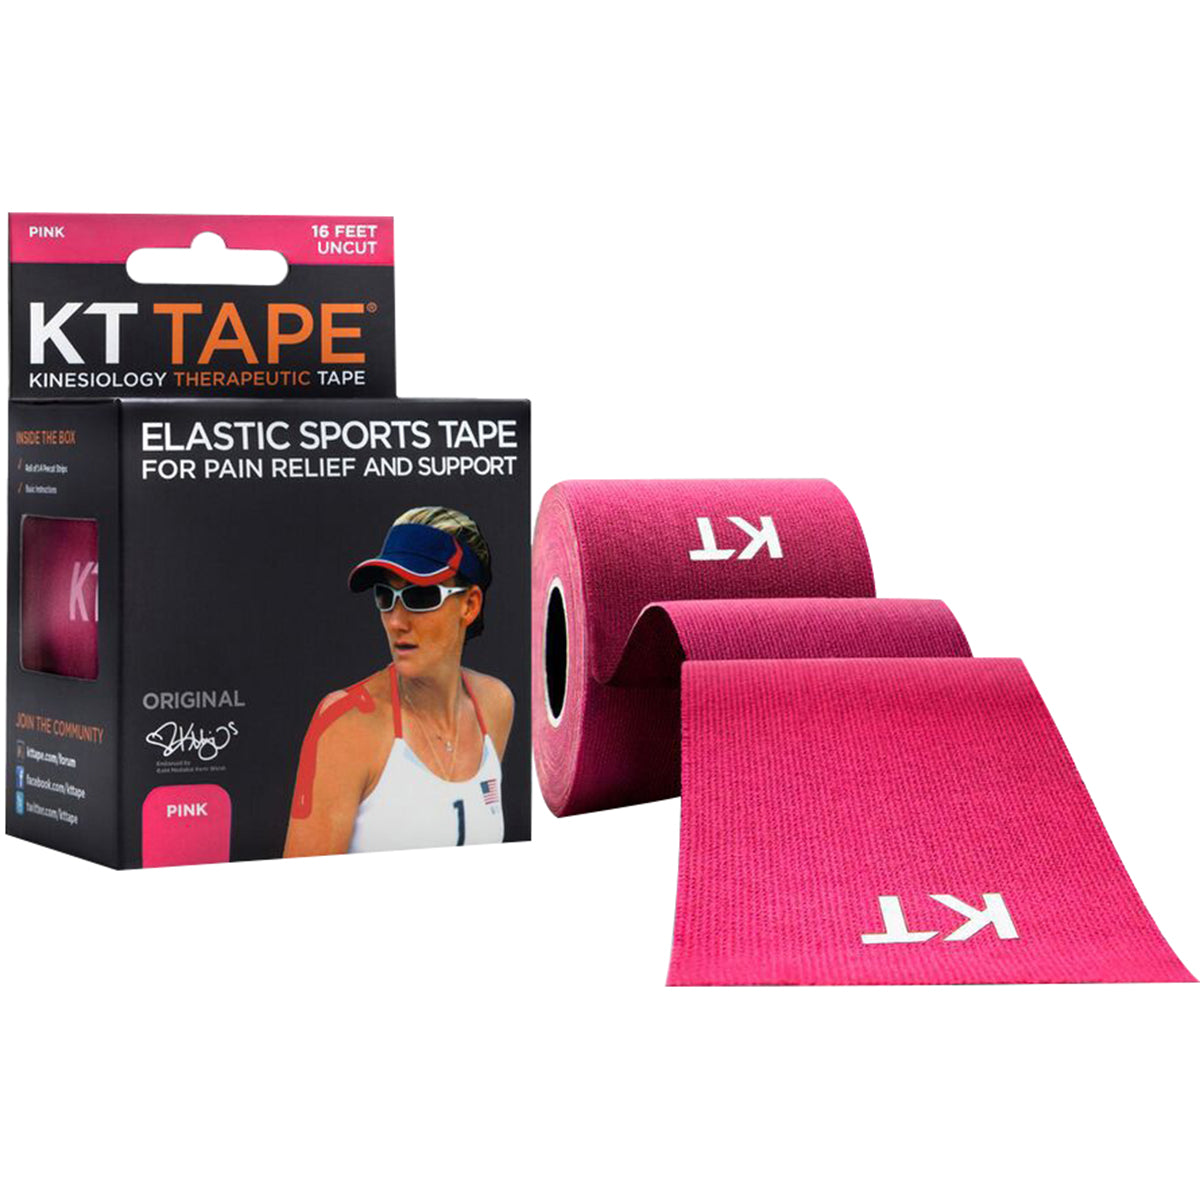 KT Tape Cotton 16 ft Uncut Kinesiology Therapeutic Elastic Sports Tape Roll KT Tape